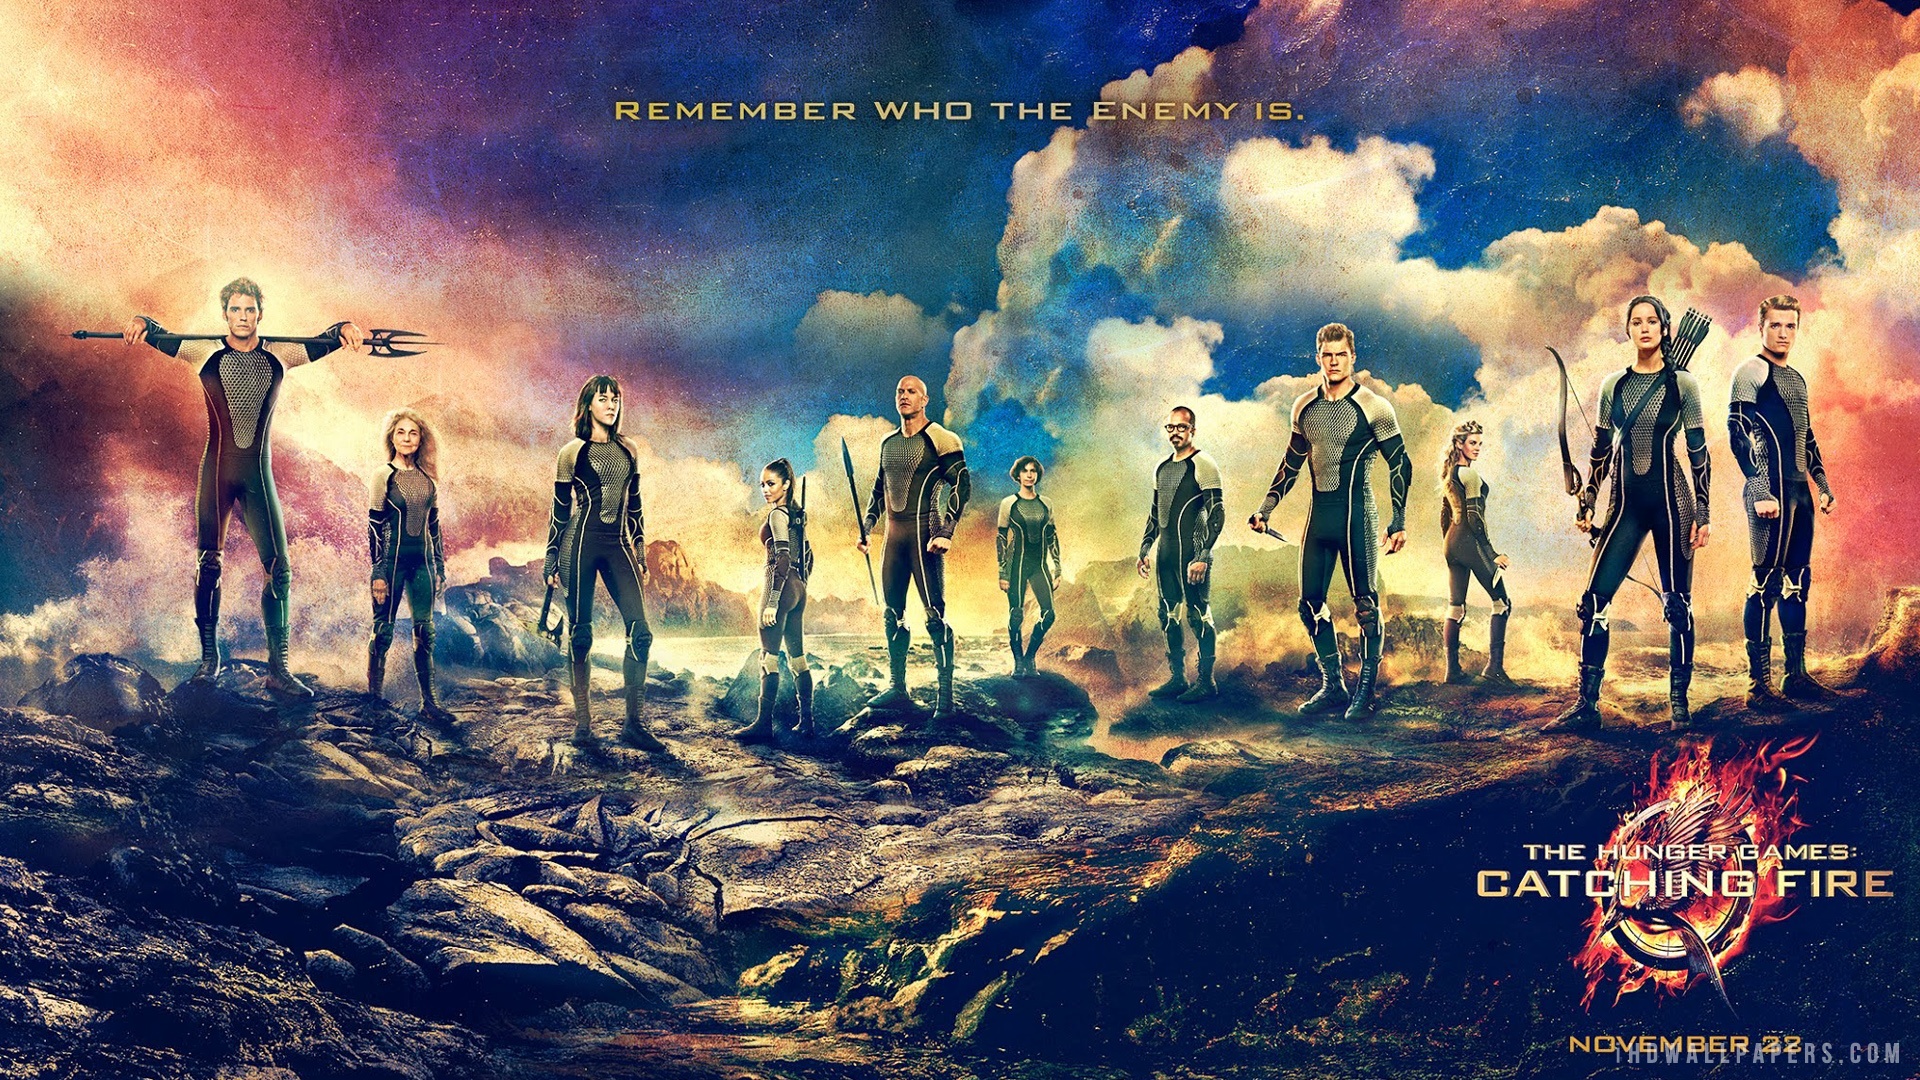 Download 2013 The Hunger Games Catching Fire wallpaper from the 1920x1080